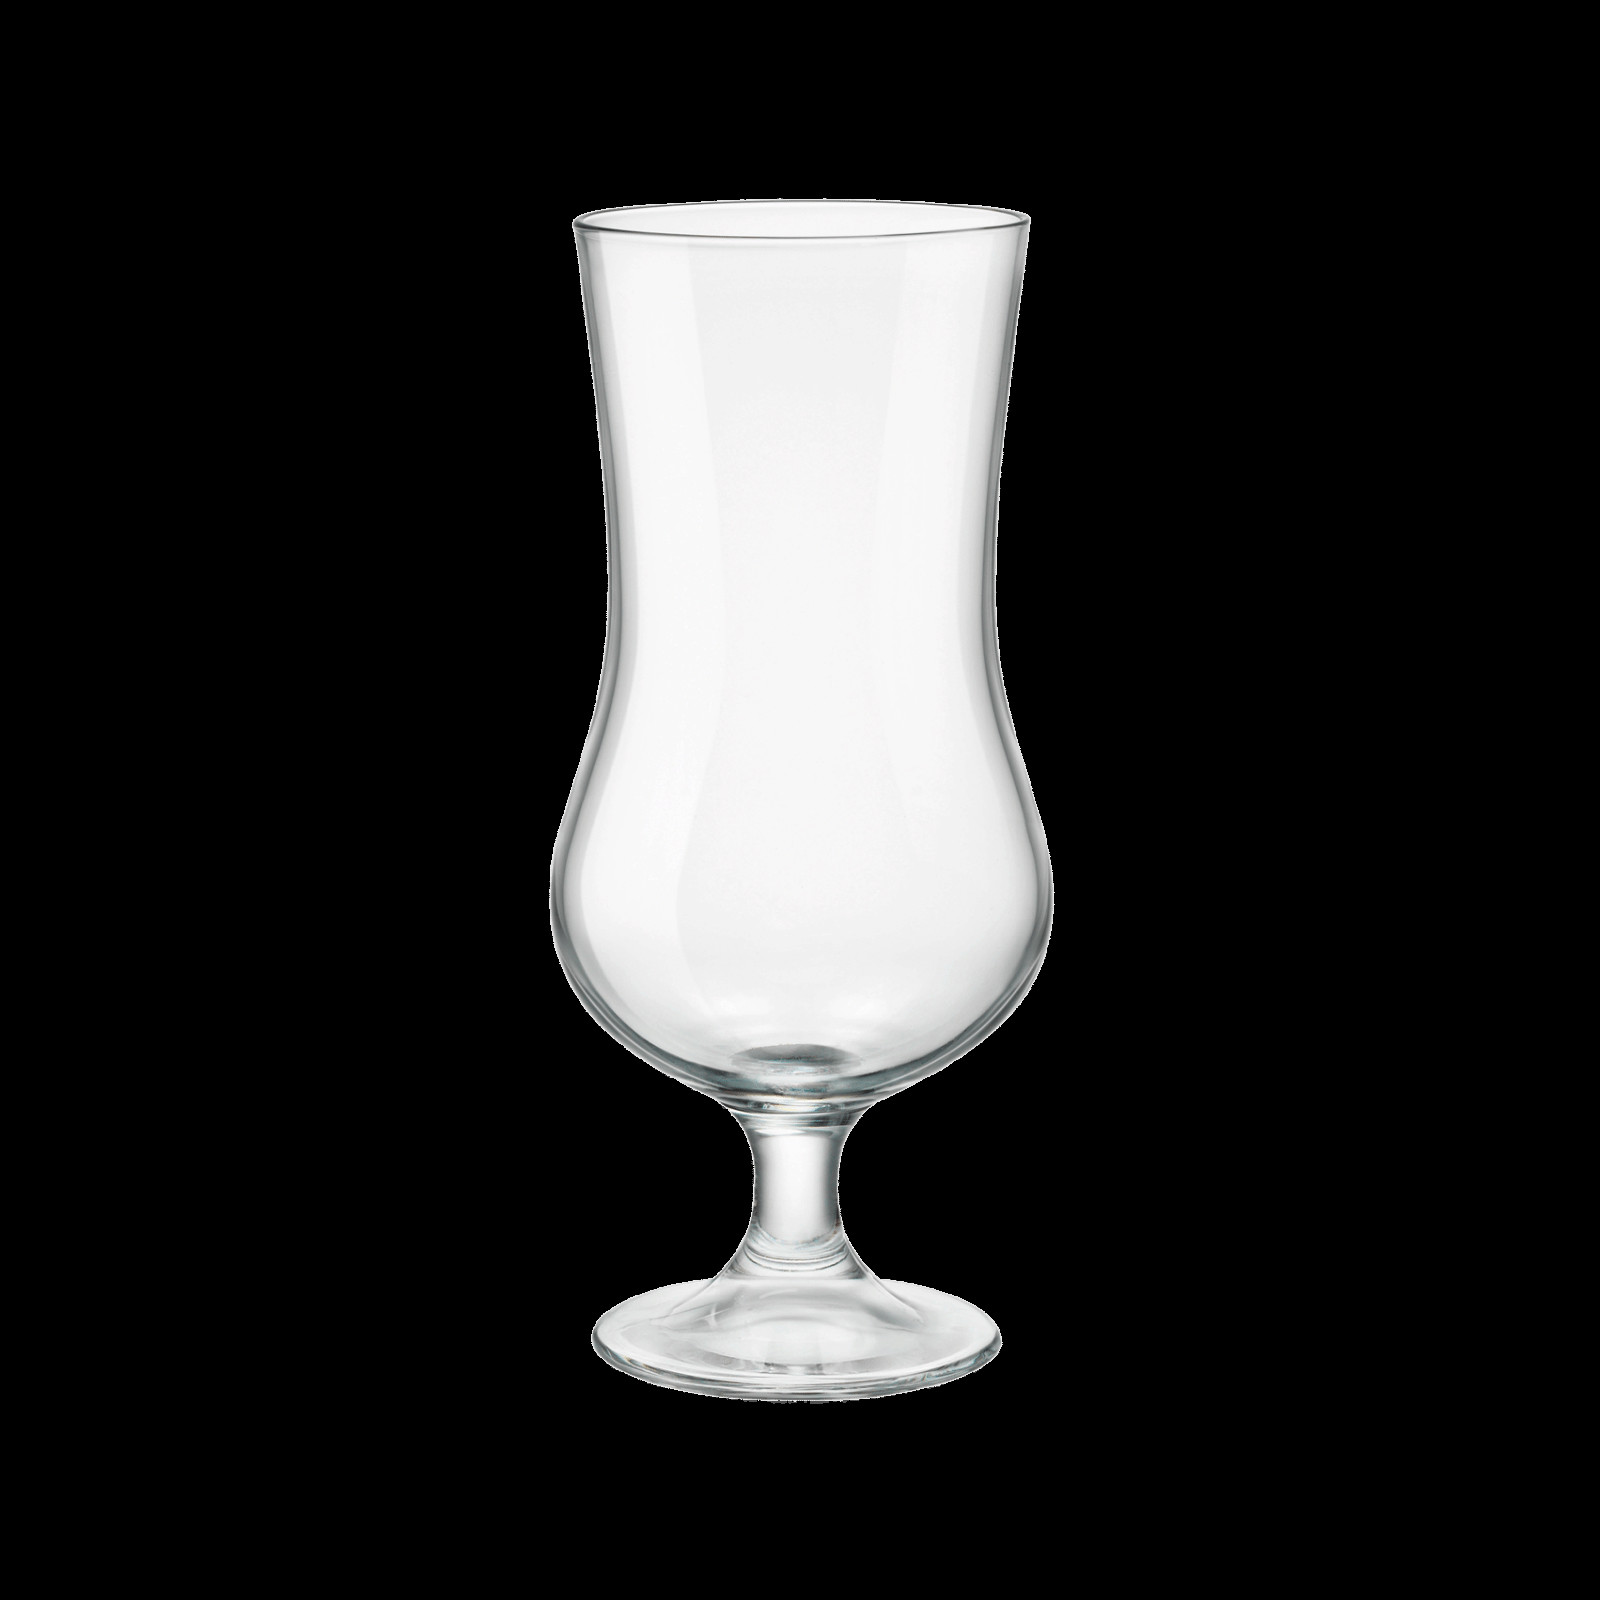 26 Wonderful Medium Round Glass Vase 2024 free download medium round glass vase of archivi products bormioli rocco throughout small beer glass